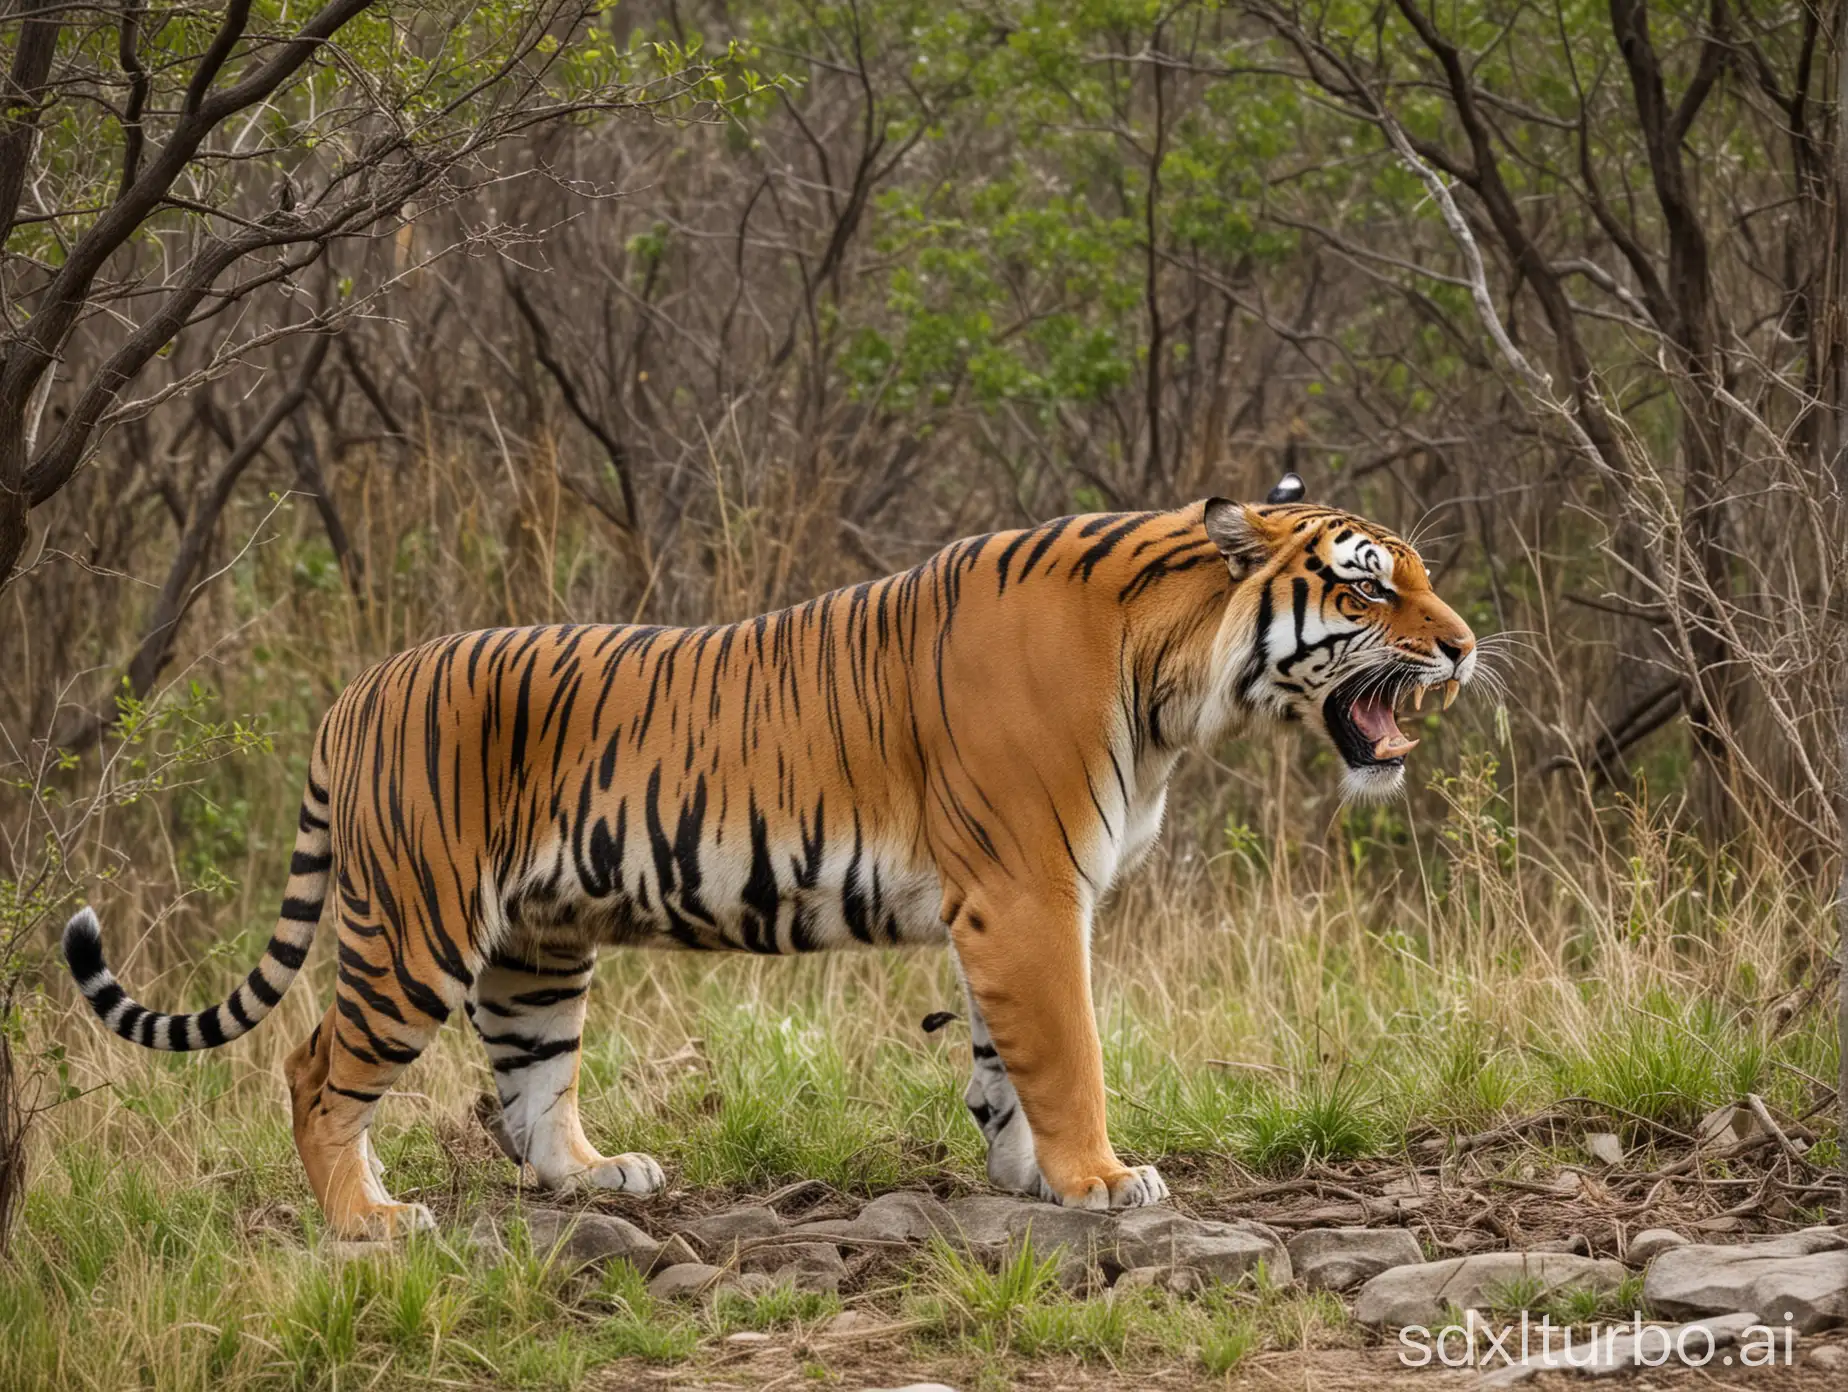 Huge Bengal Tiger Snarling in a rocky trees grassy bushes